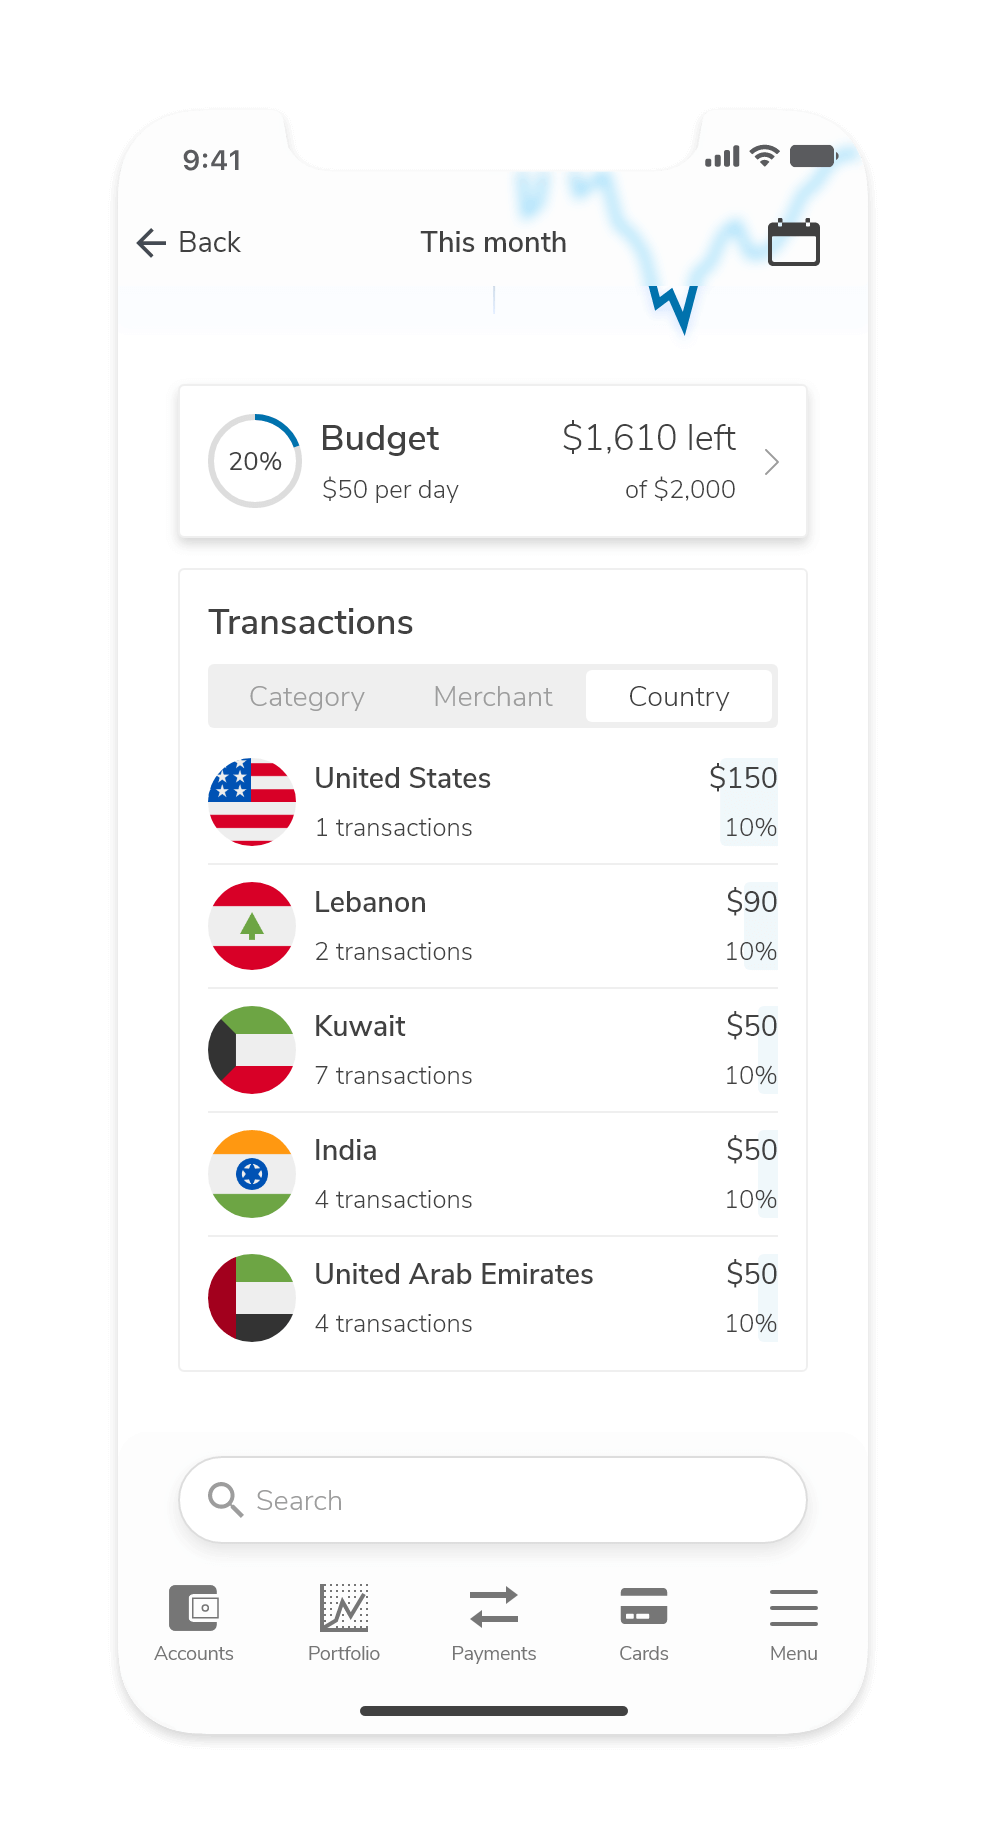 Screenshot of the Transaction analytics categorized by Country, users can also track Transaction by Category, and Merchant.